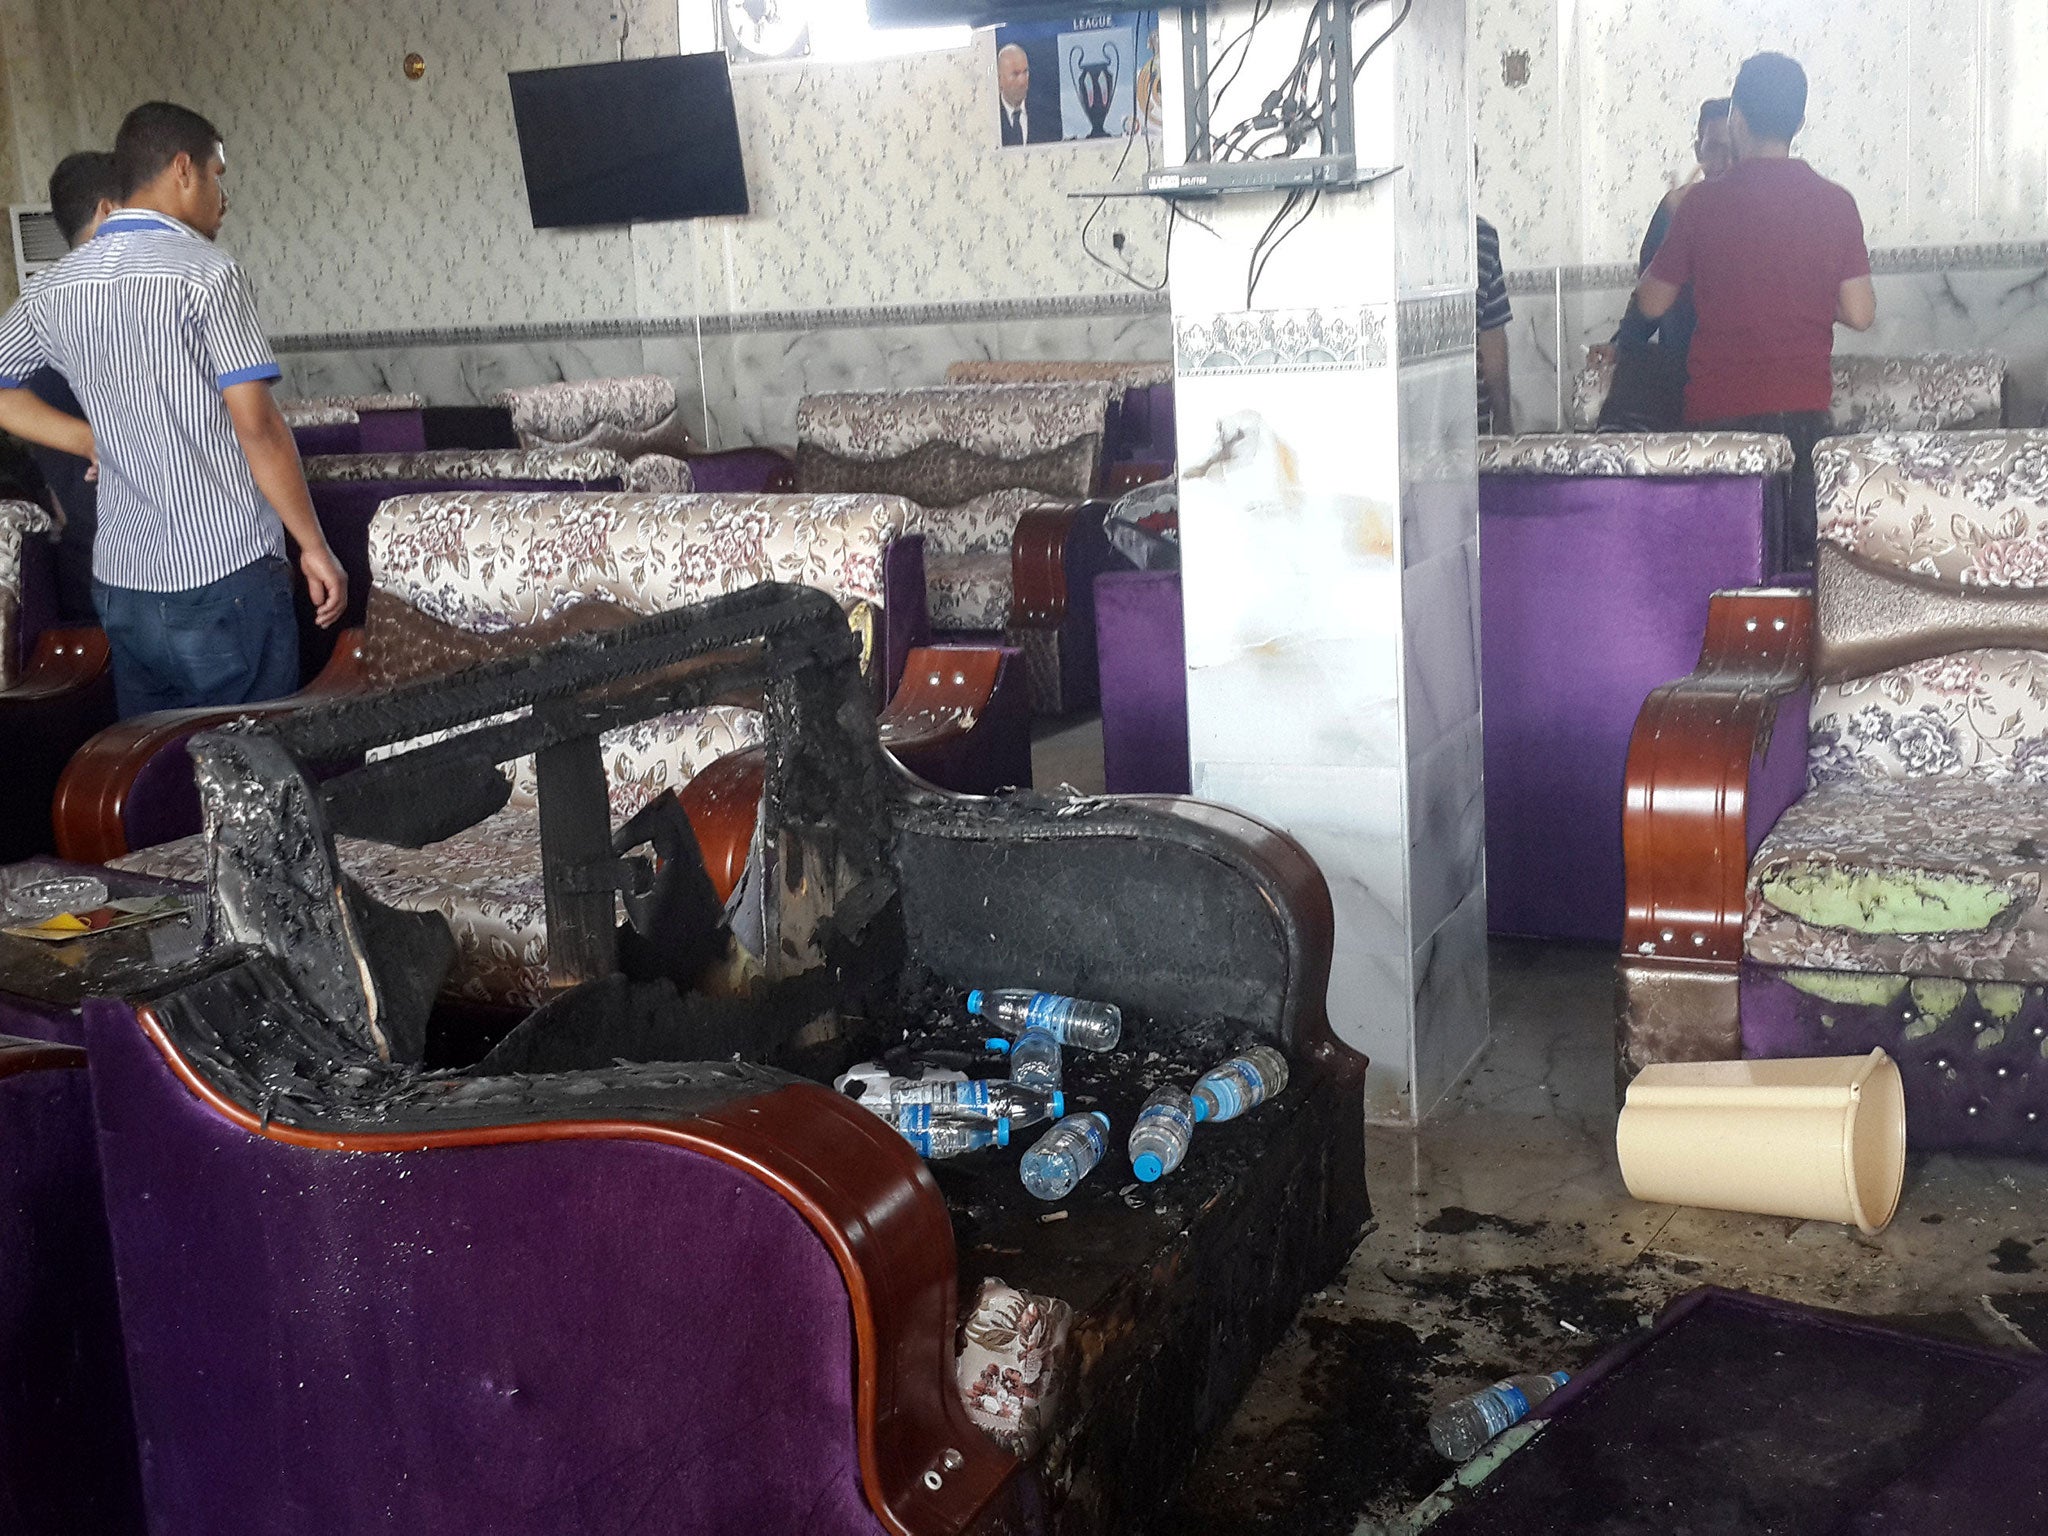 Damage inside a cafe after an attack in the predominately Shia Muslim city of Balad, Iraq, May 13 2016.